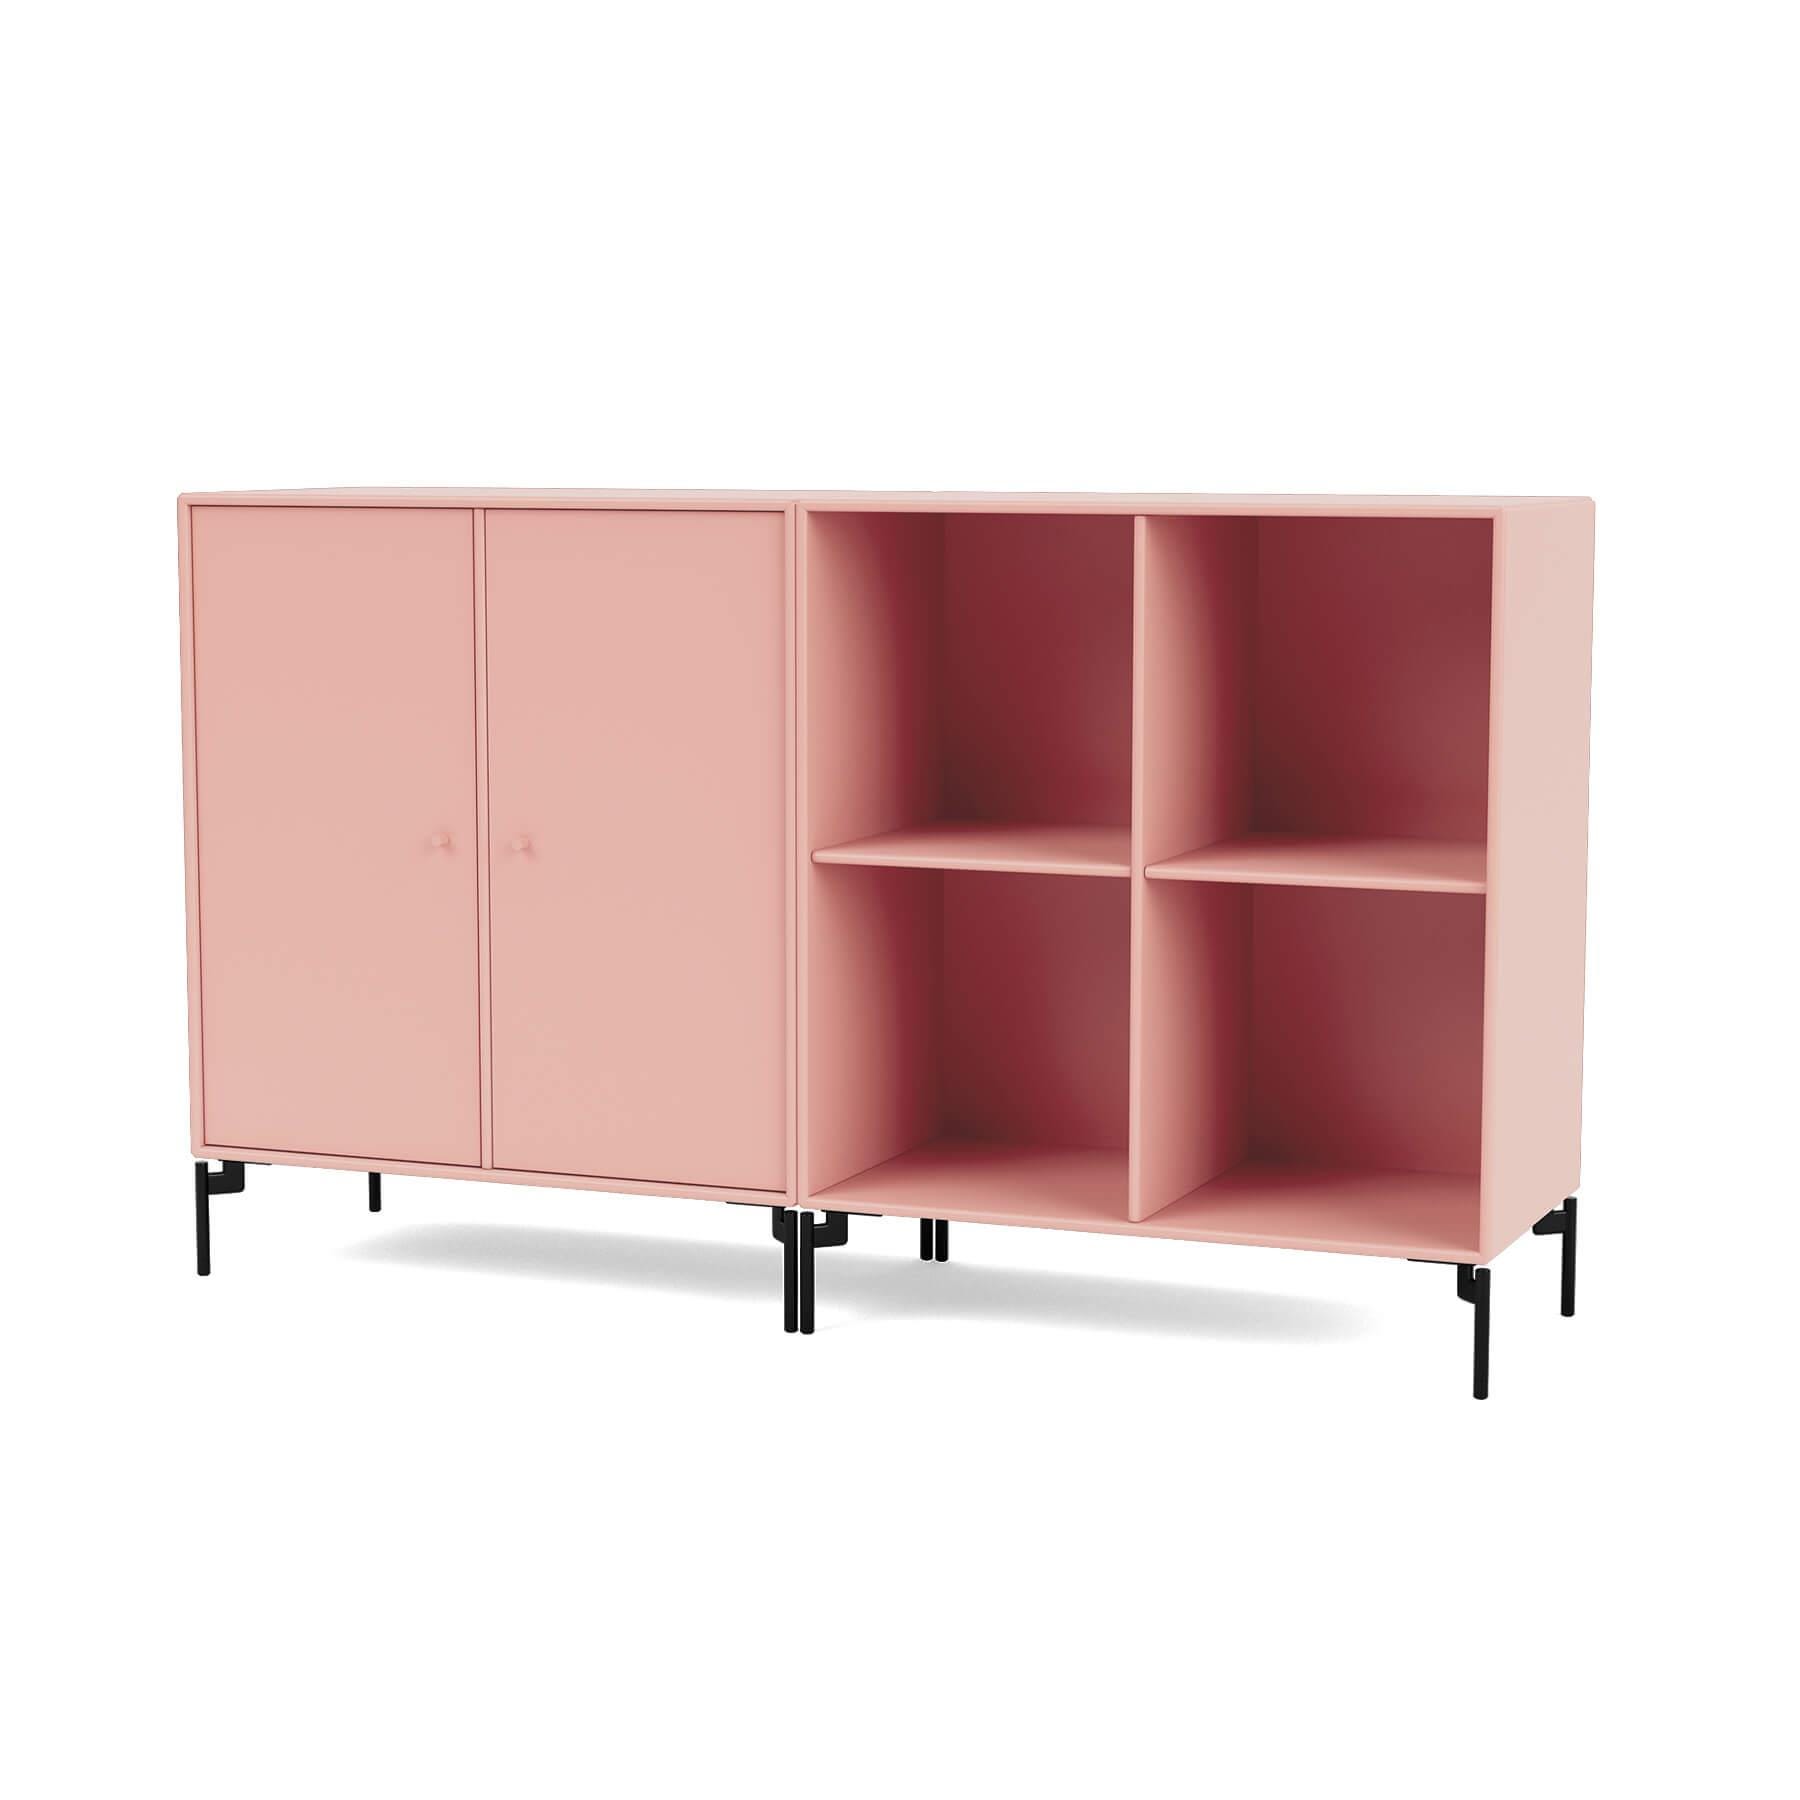 Montana Pair Classic Sideboard Ruby Black Legs Pink Designer Furniture From Holloways Of Ludlow